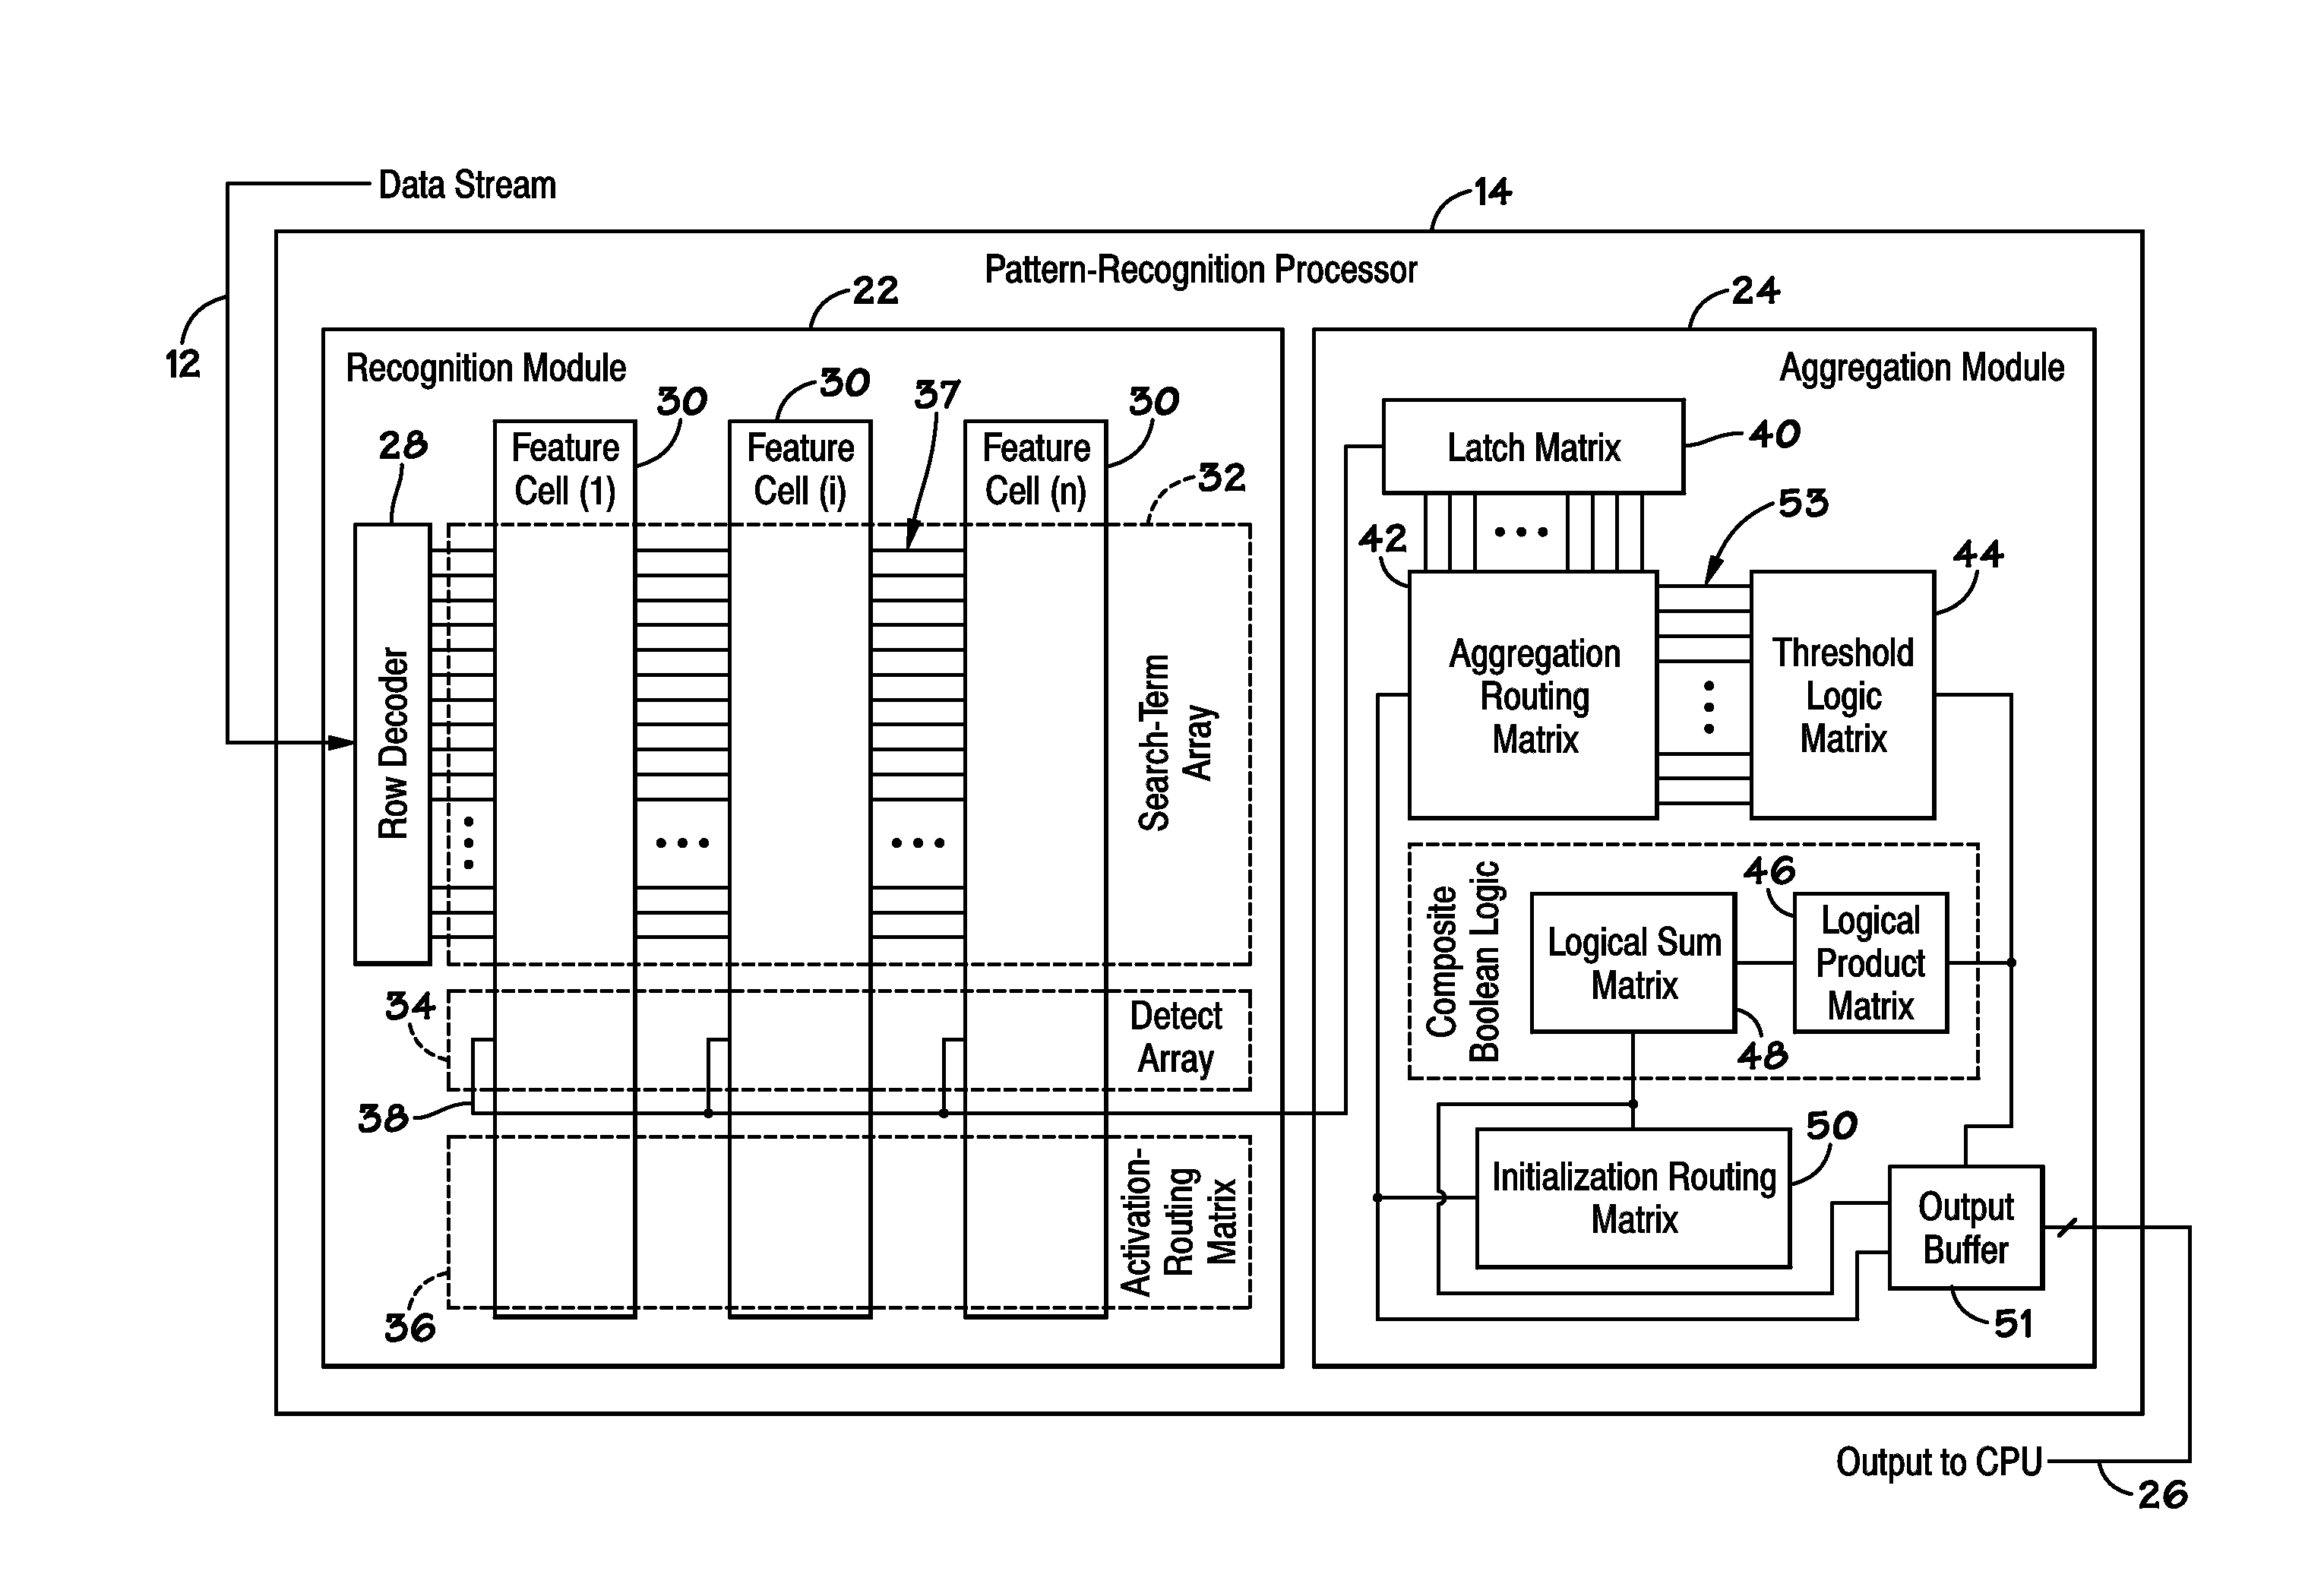 Multi-level hierarchical routing matrices for pattern-recognition processors